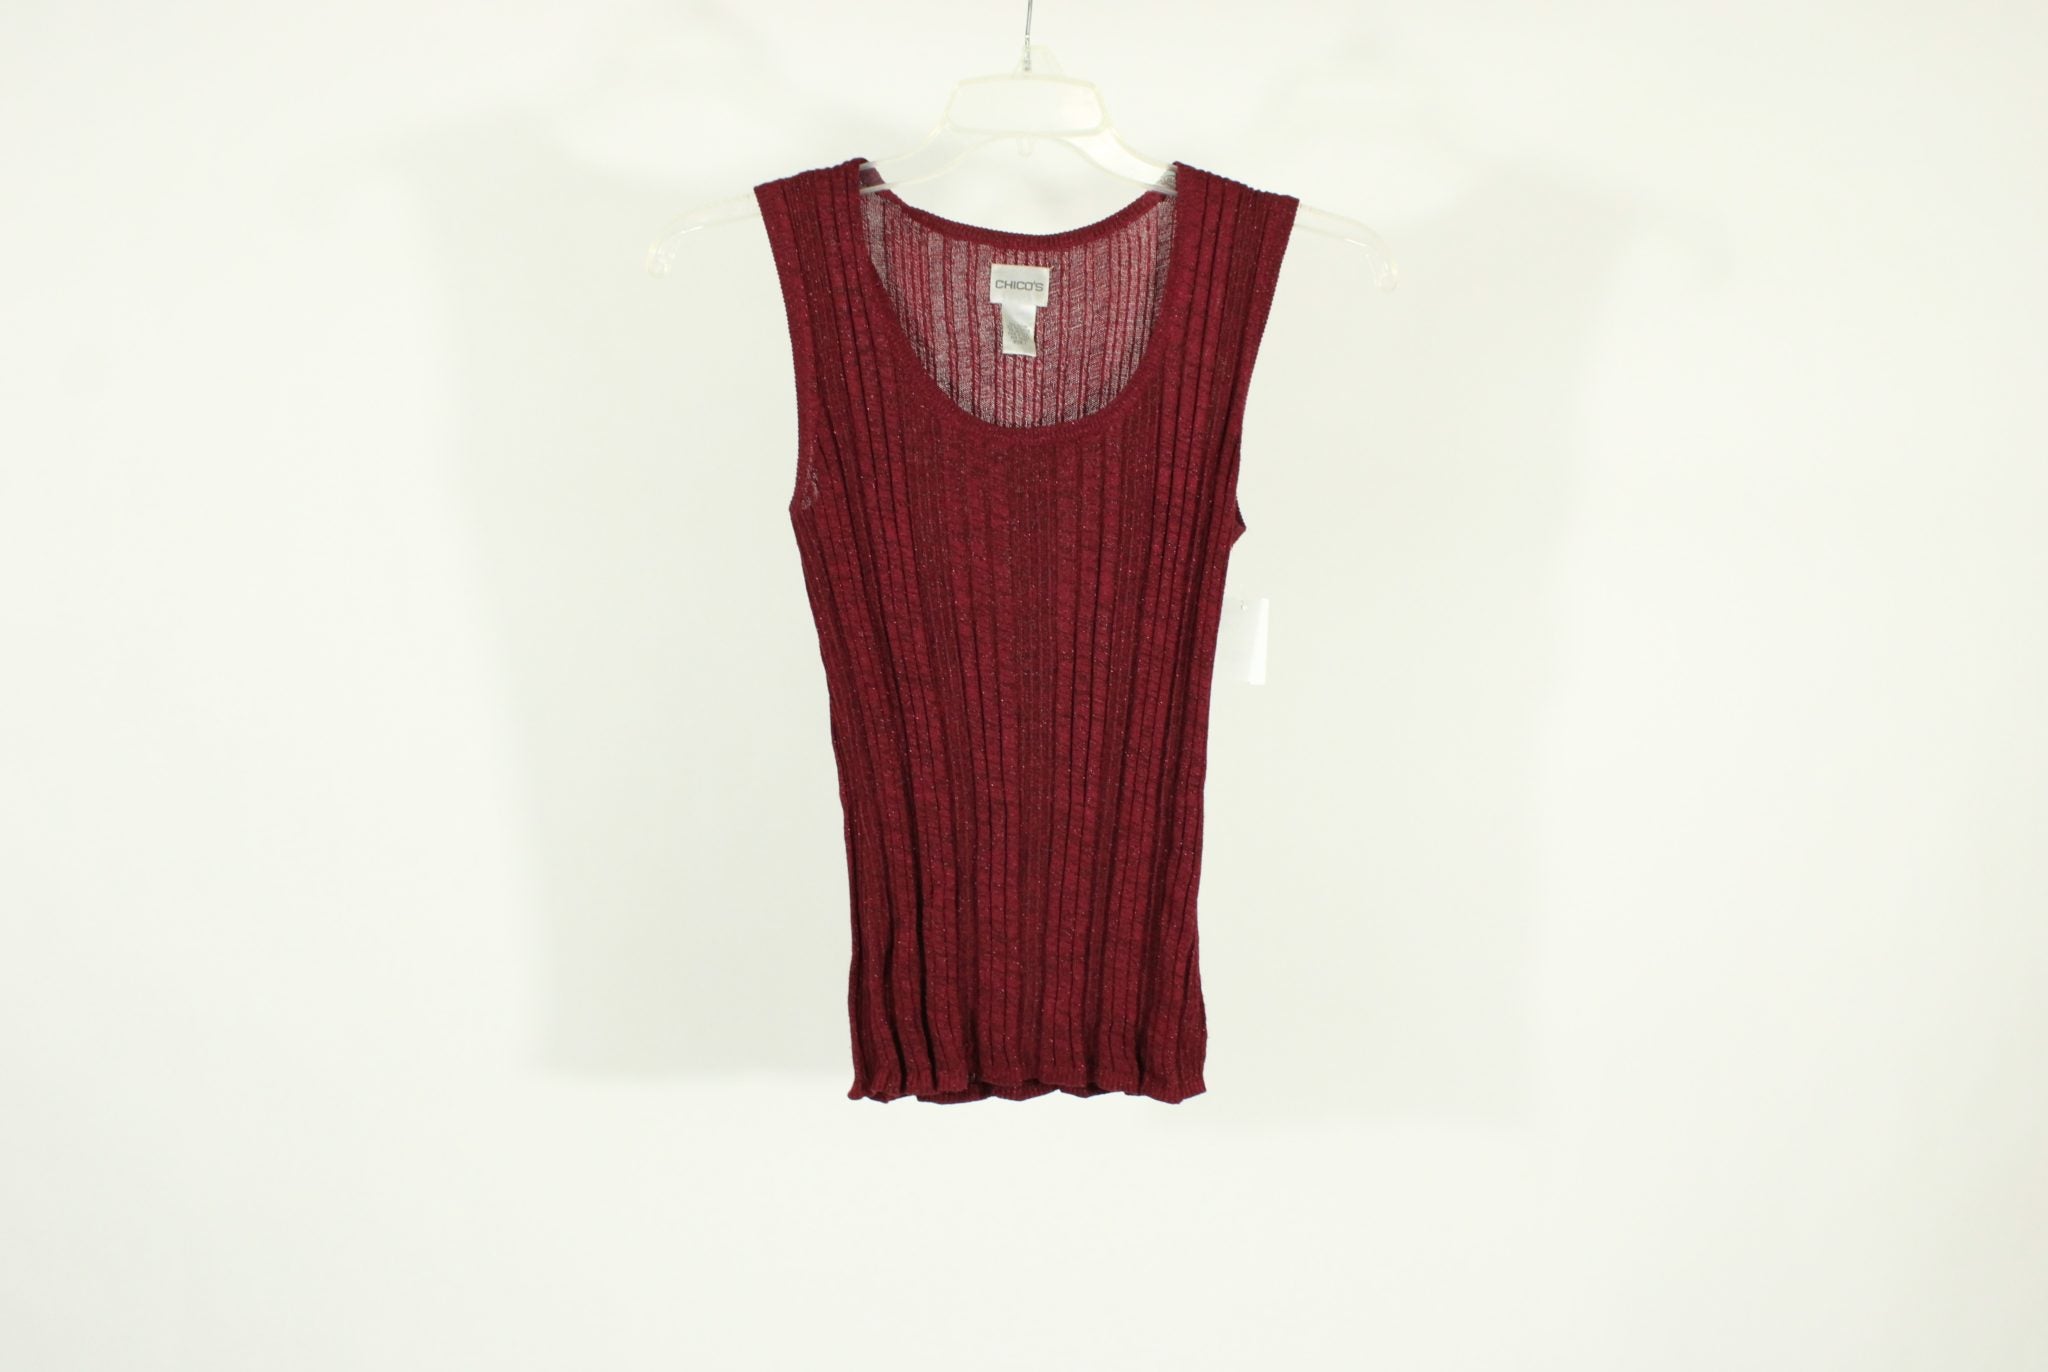 Chico's Red Knit Top | Size 1 (M)